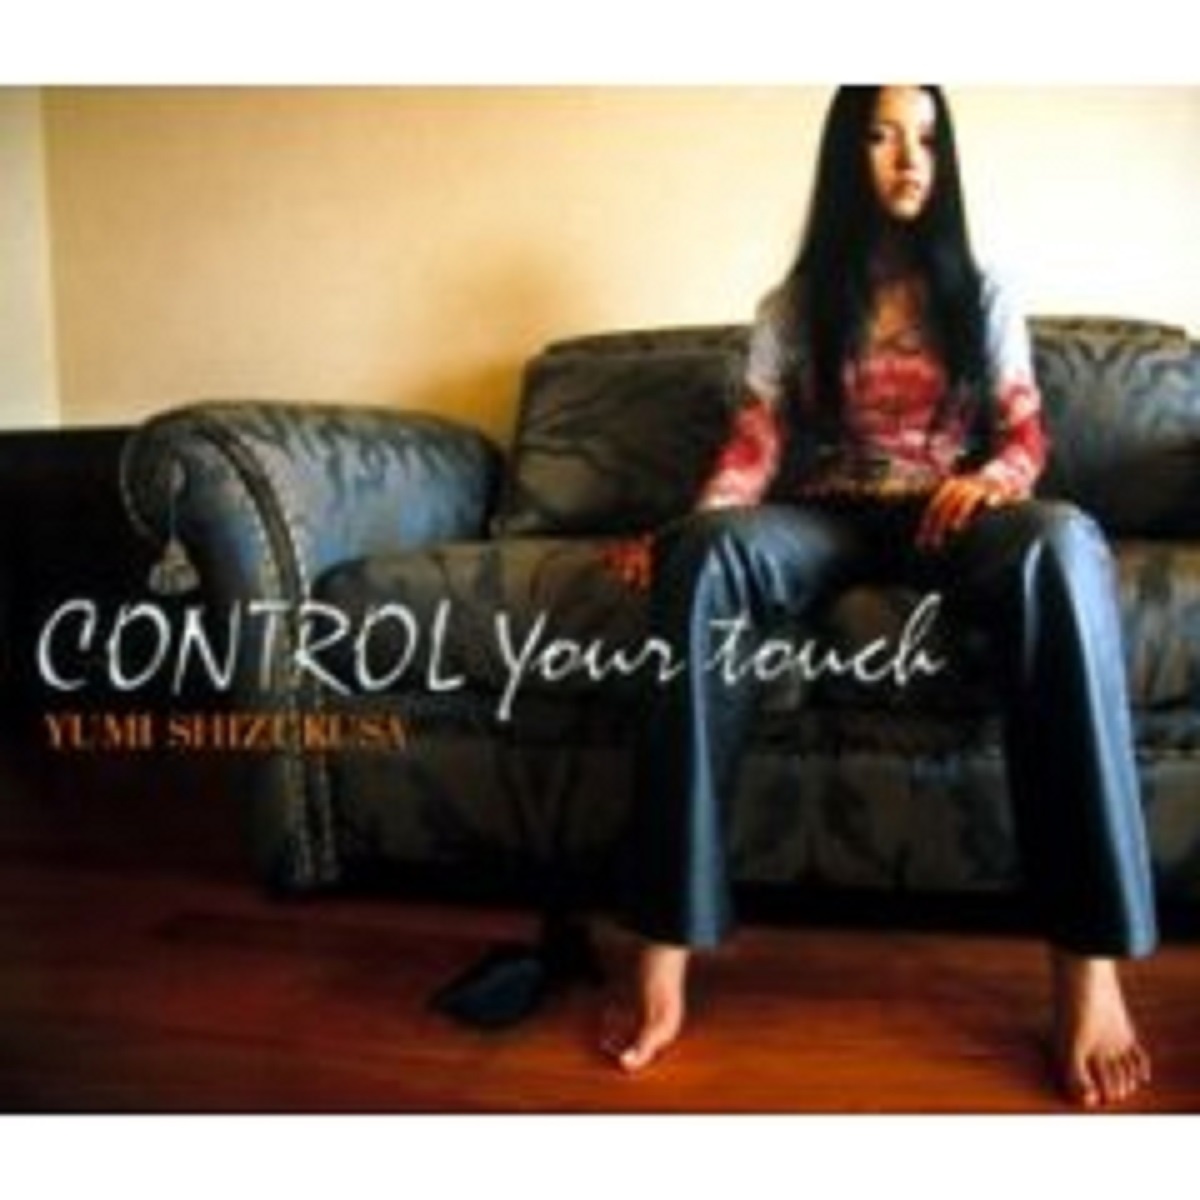 CONTROL Your touch~N